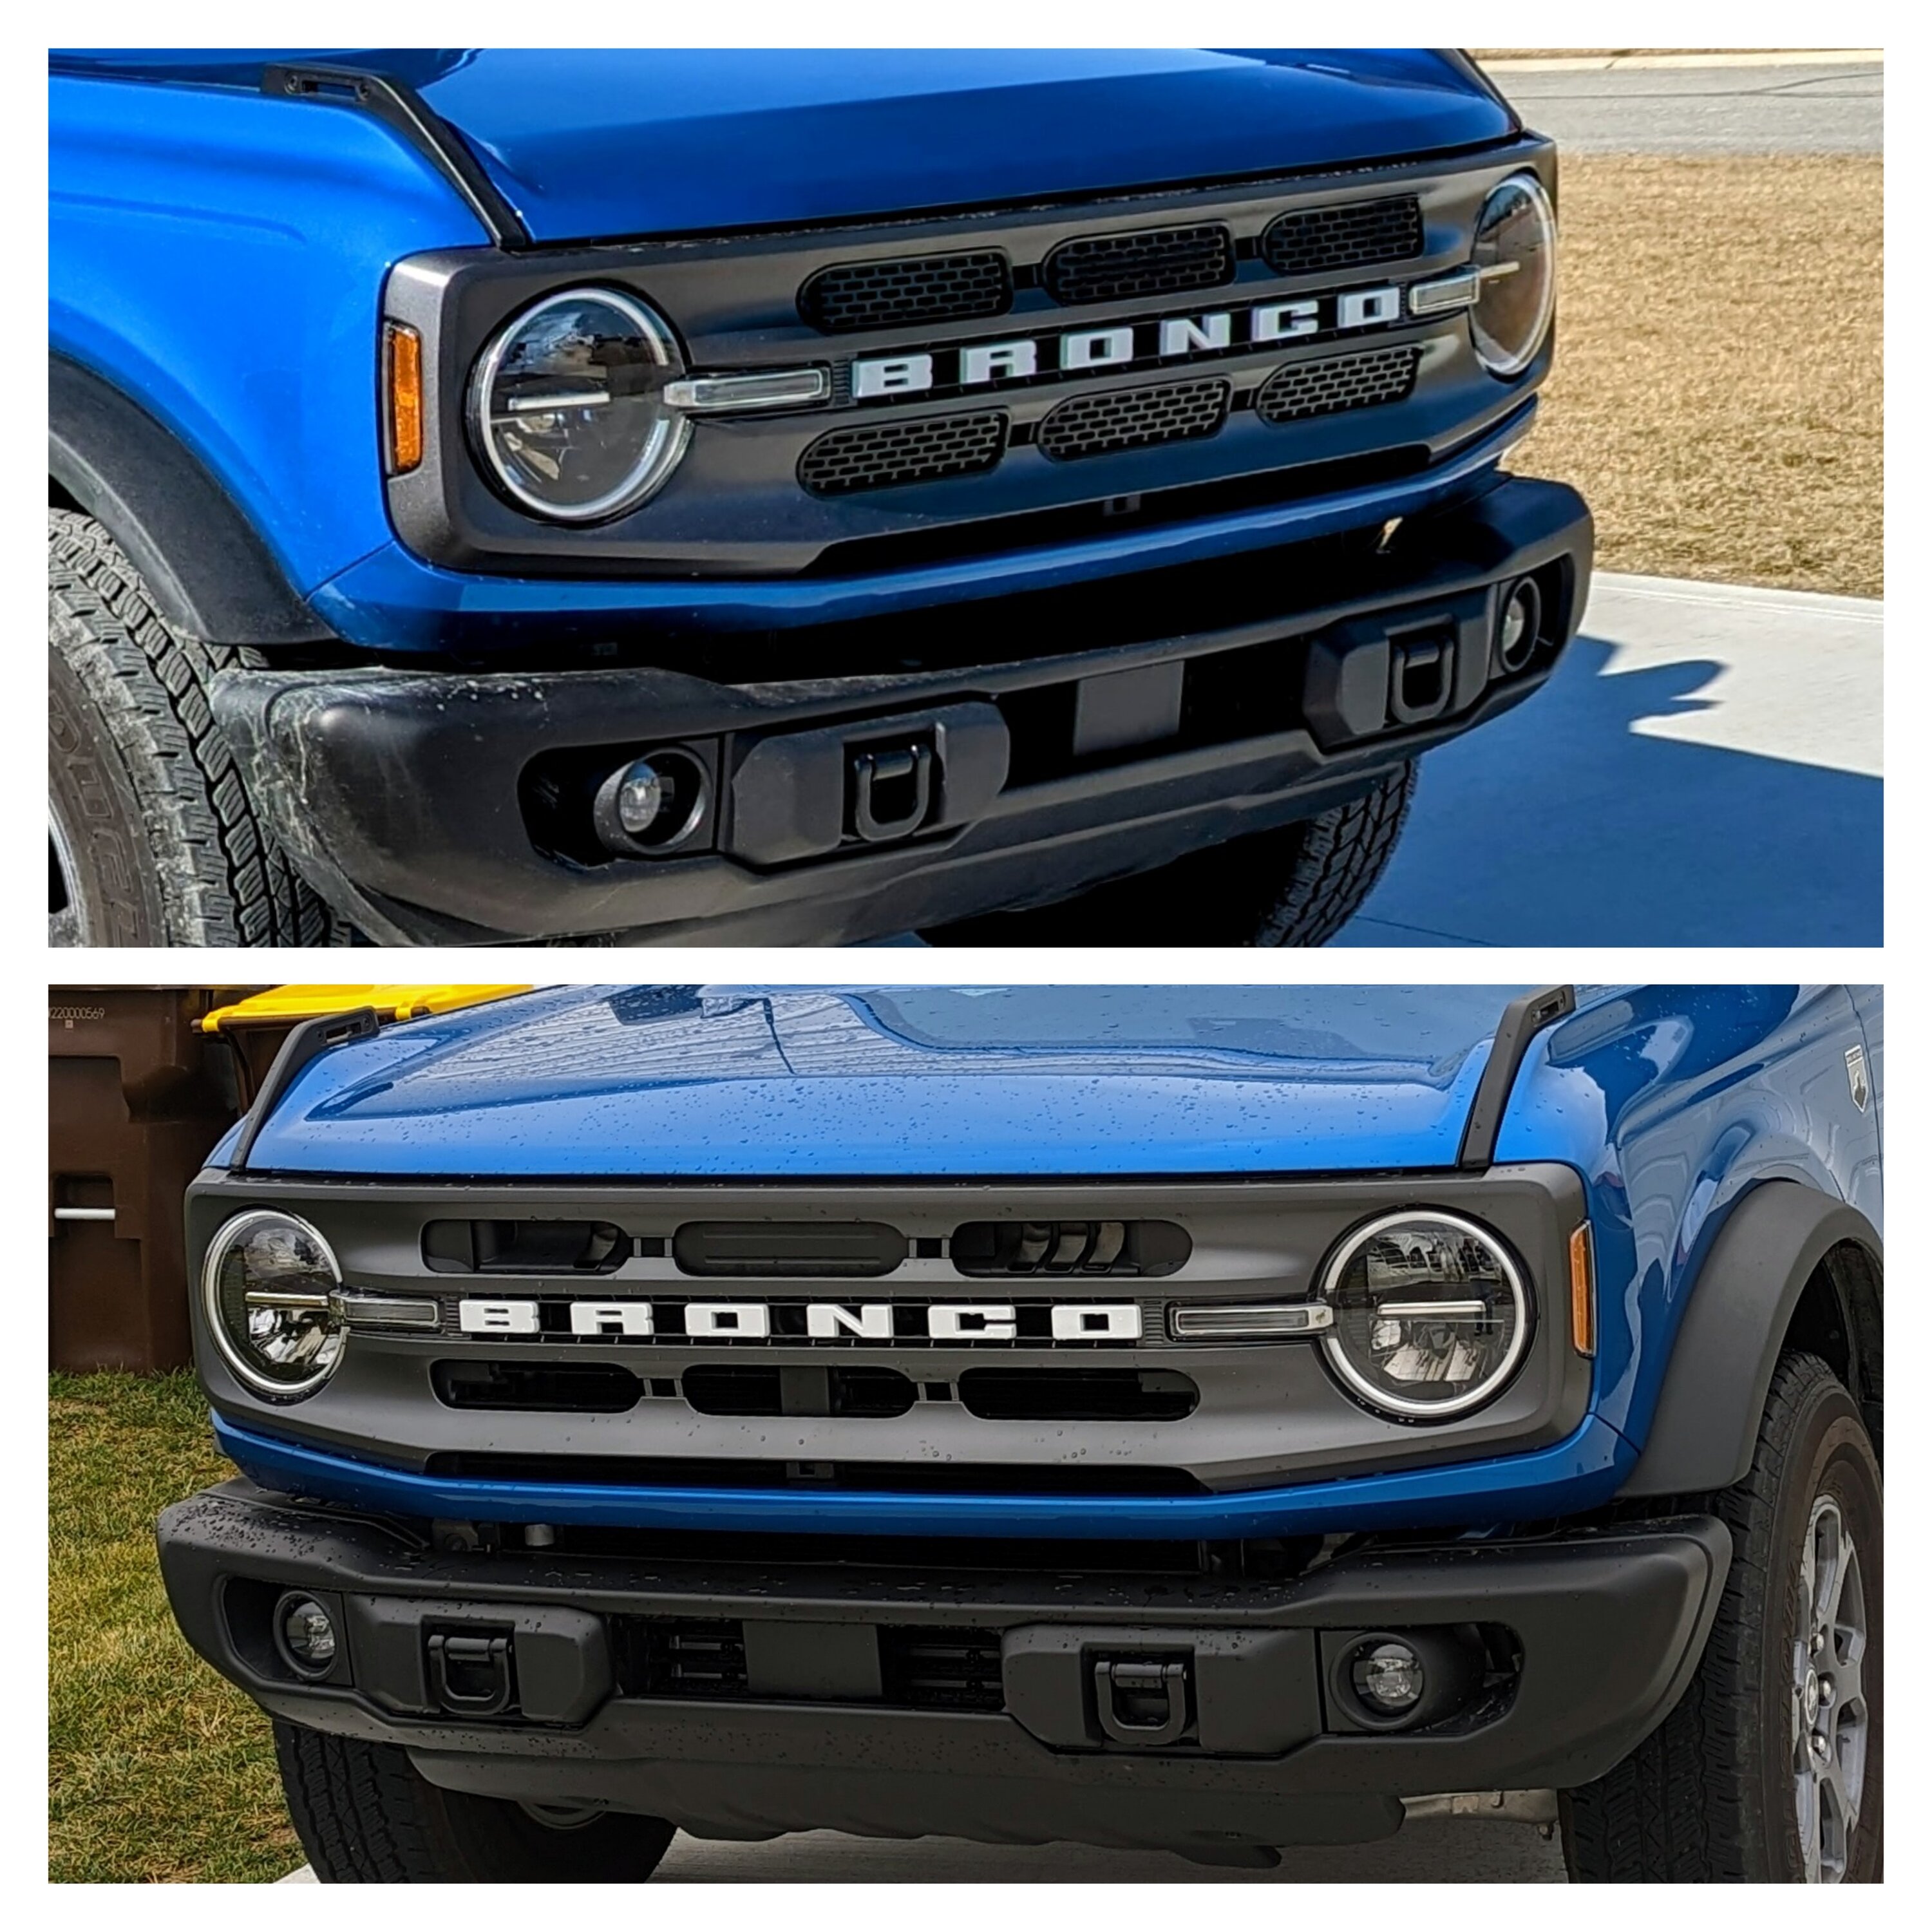 Ford Bronco Mesh grill inserts installed on Big Bend GridArt_20230213_182106014